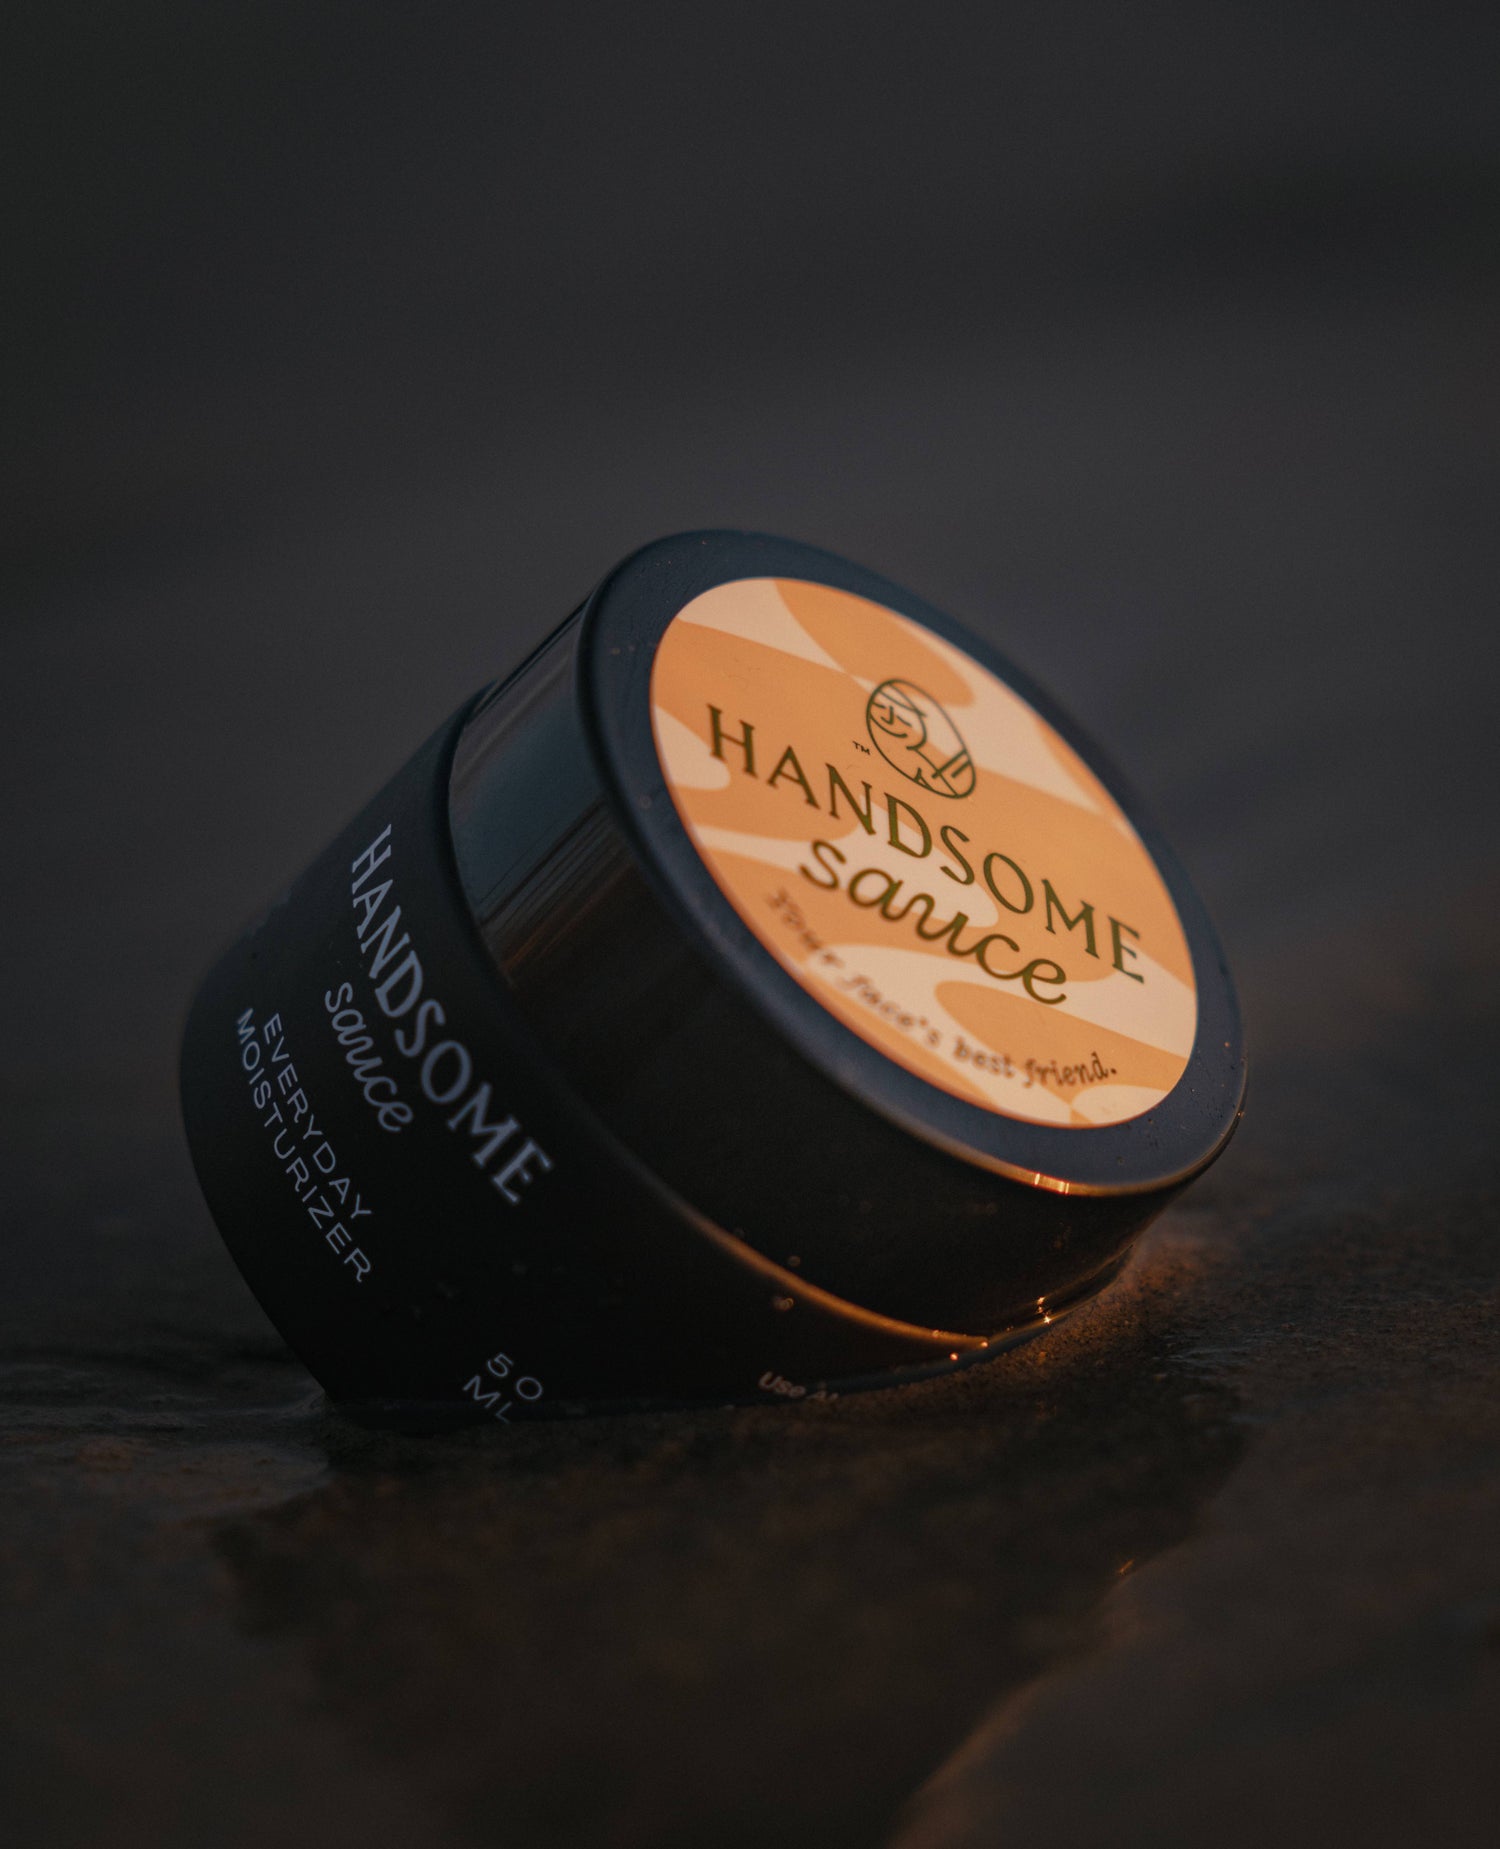 Handsome Sauce mens skincare, highest quality skin care for man. Premium face moisturizer, unscented, non-greasy. organic ingredients. 